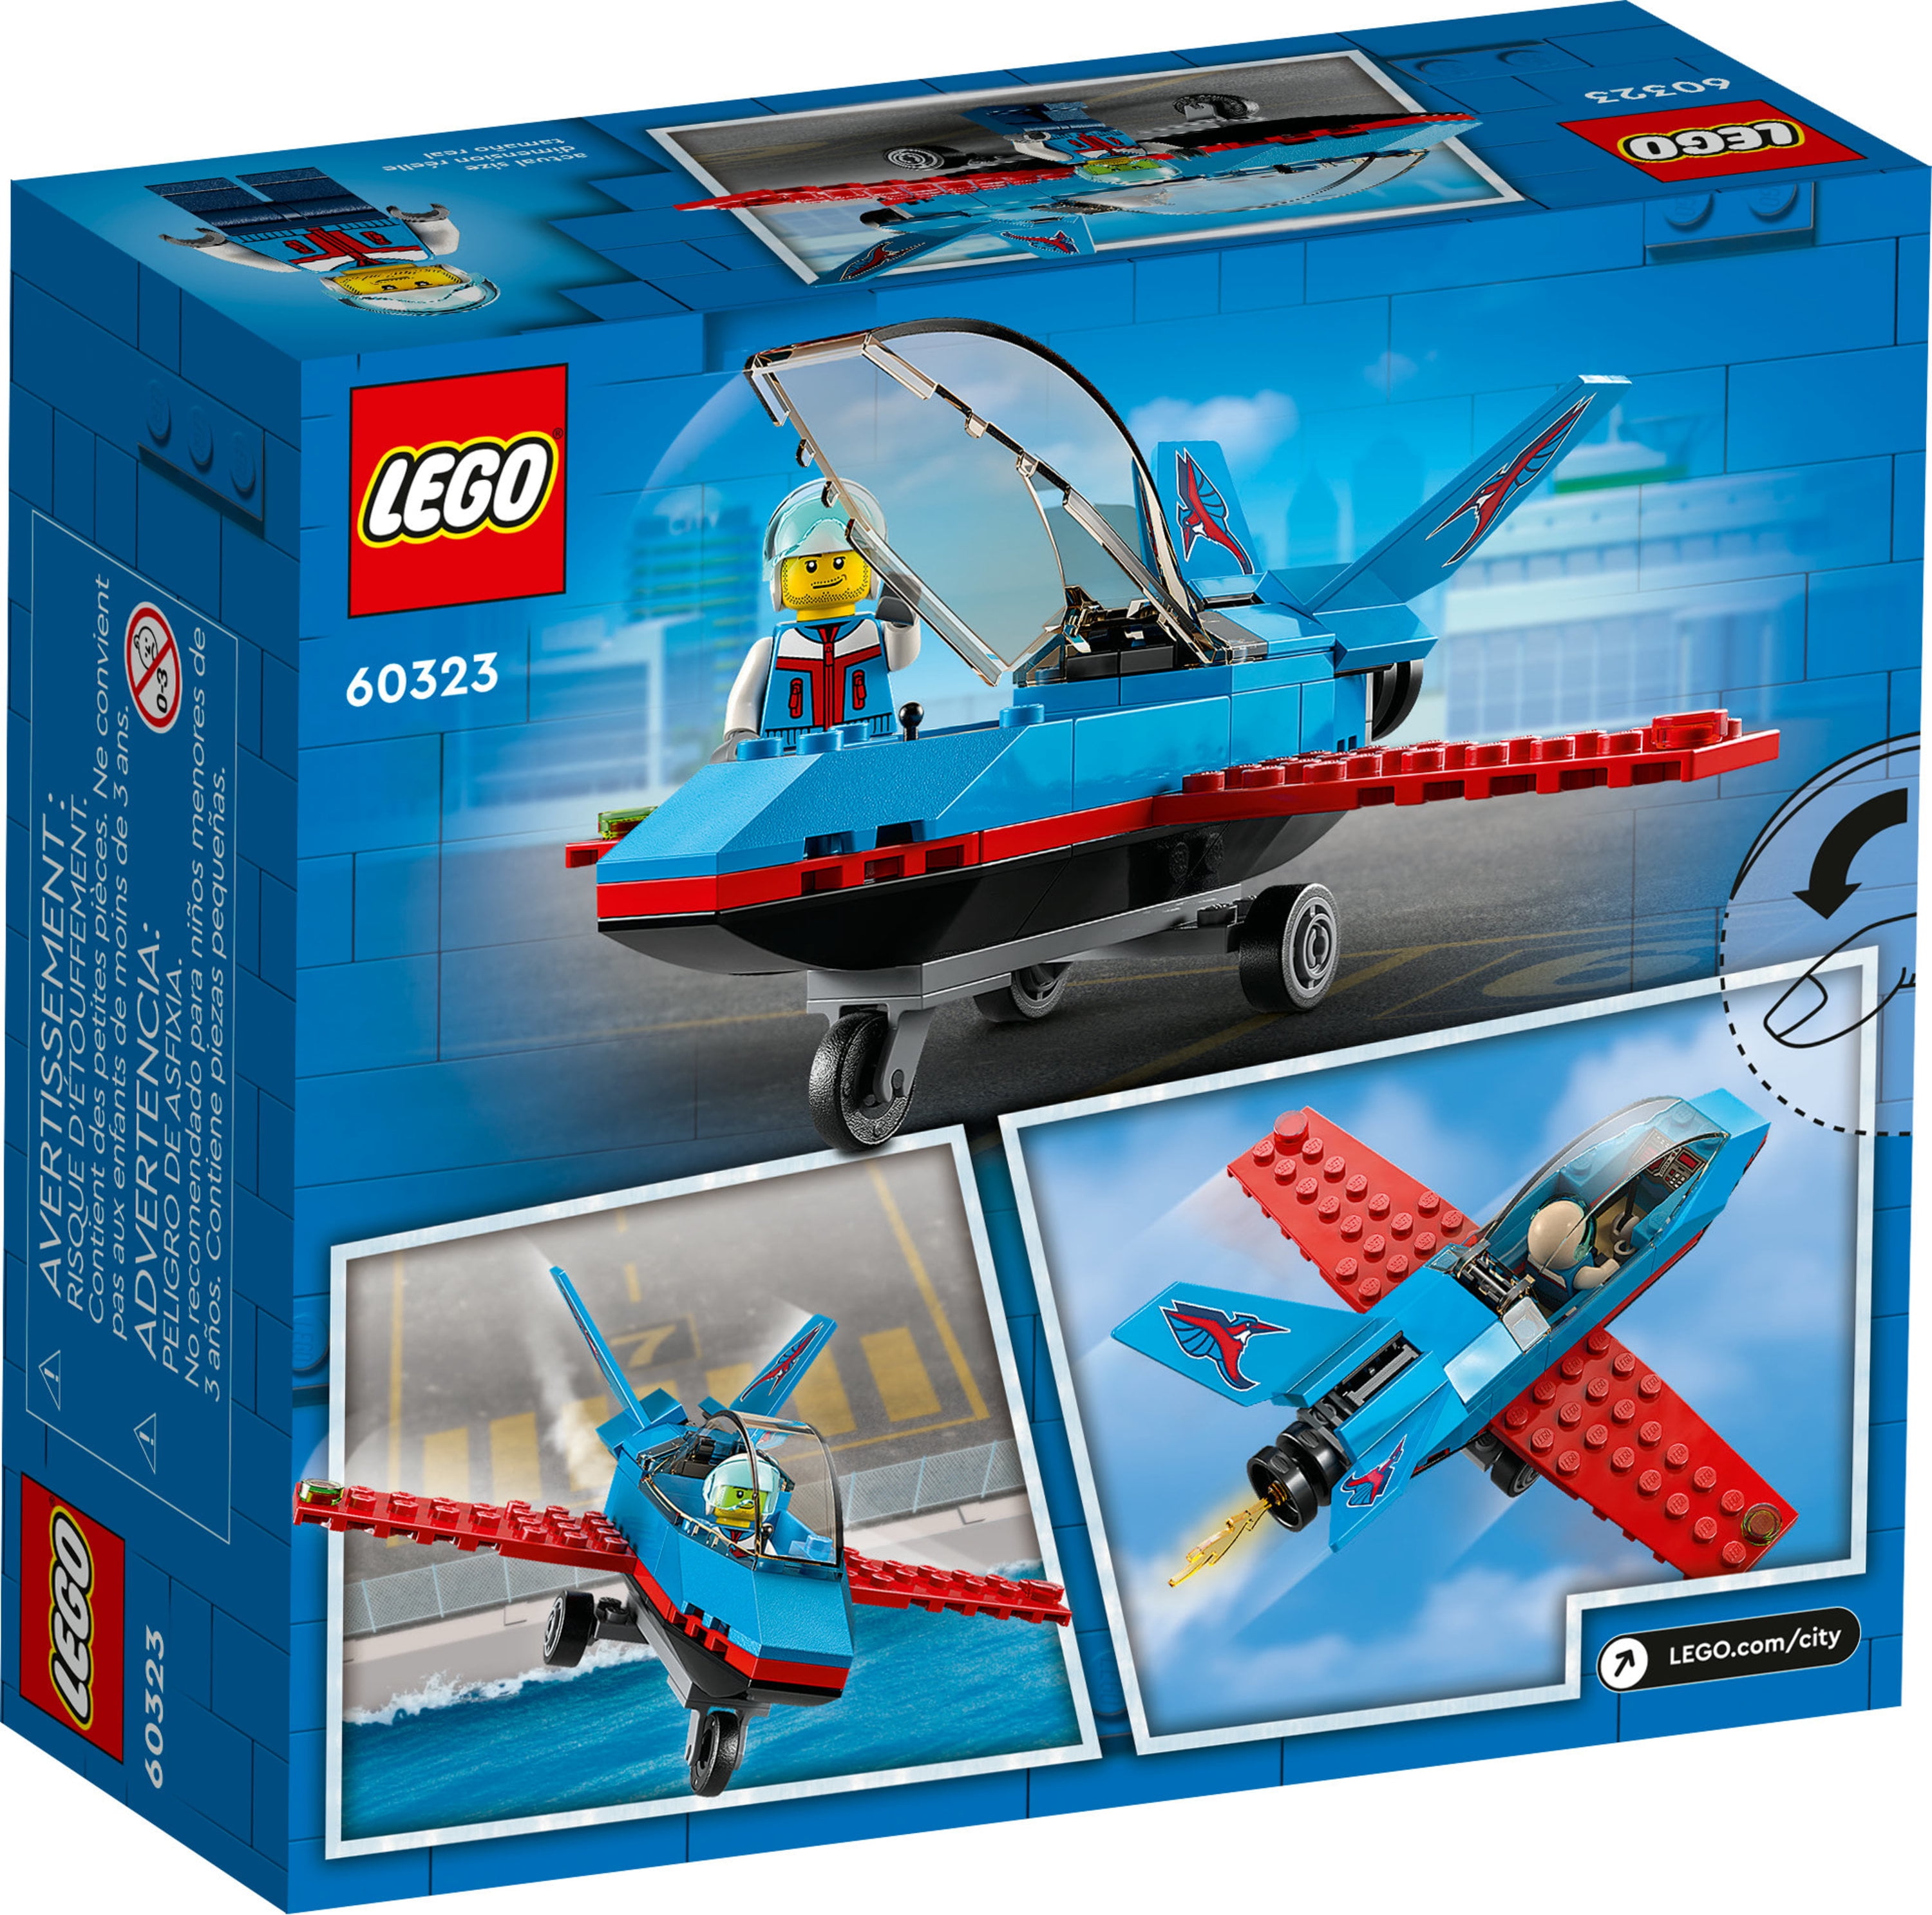 LEGO City Great Vehicles Stunt Old Minifigure Building with Gifts Pilot Toy, plus Girls 2022 Years Set, for Boys Kids, Jet 5 Airplane Plane 60323 and